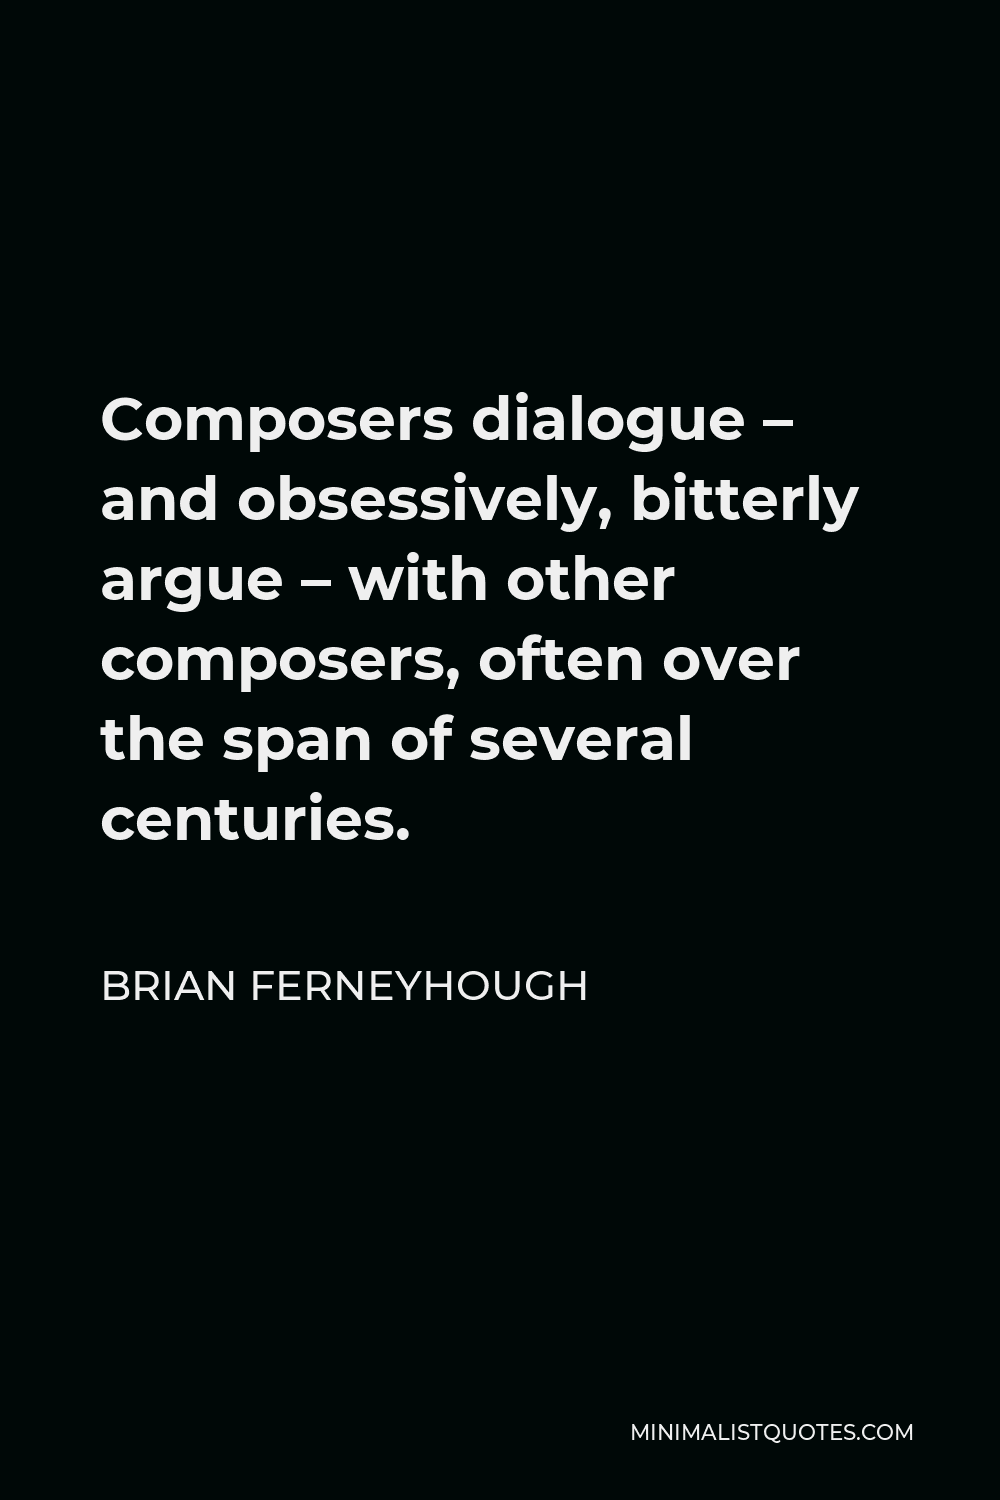 Brian Ferneyhough Quote - Composers dialogue – and obsessively, bitterly argue – with other composers, often over the span of several centuries.